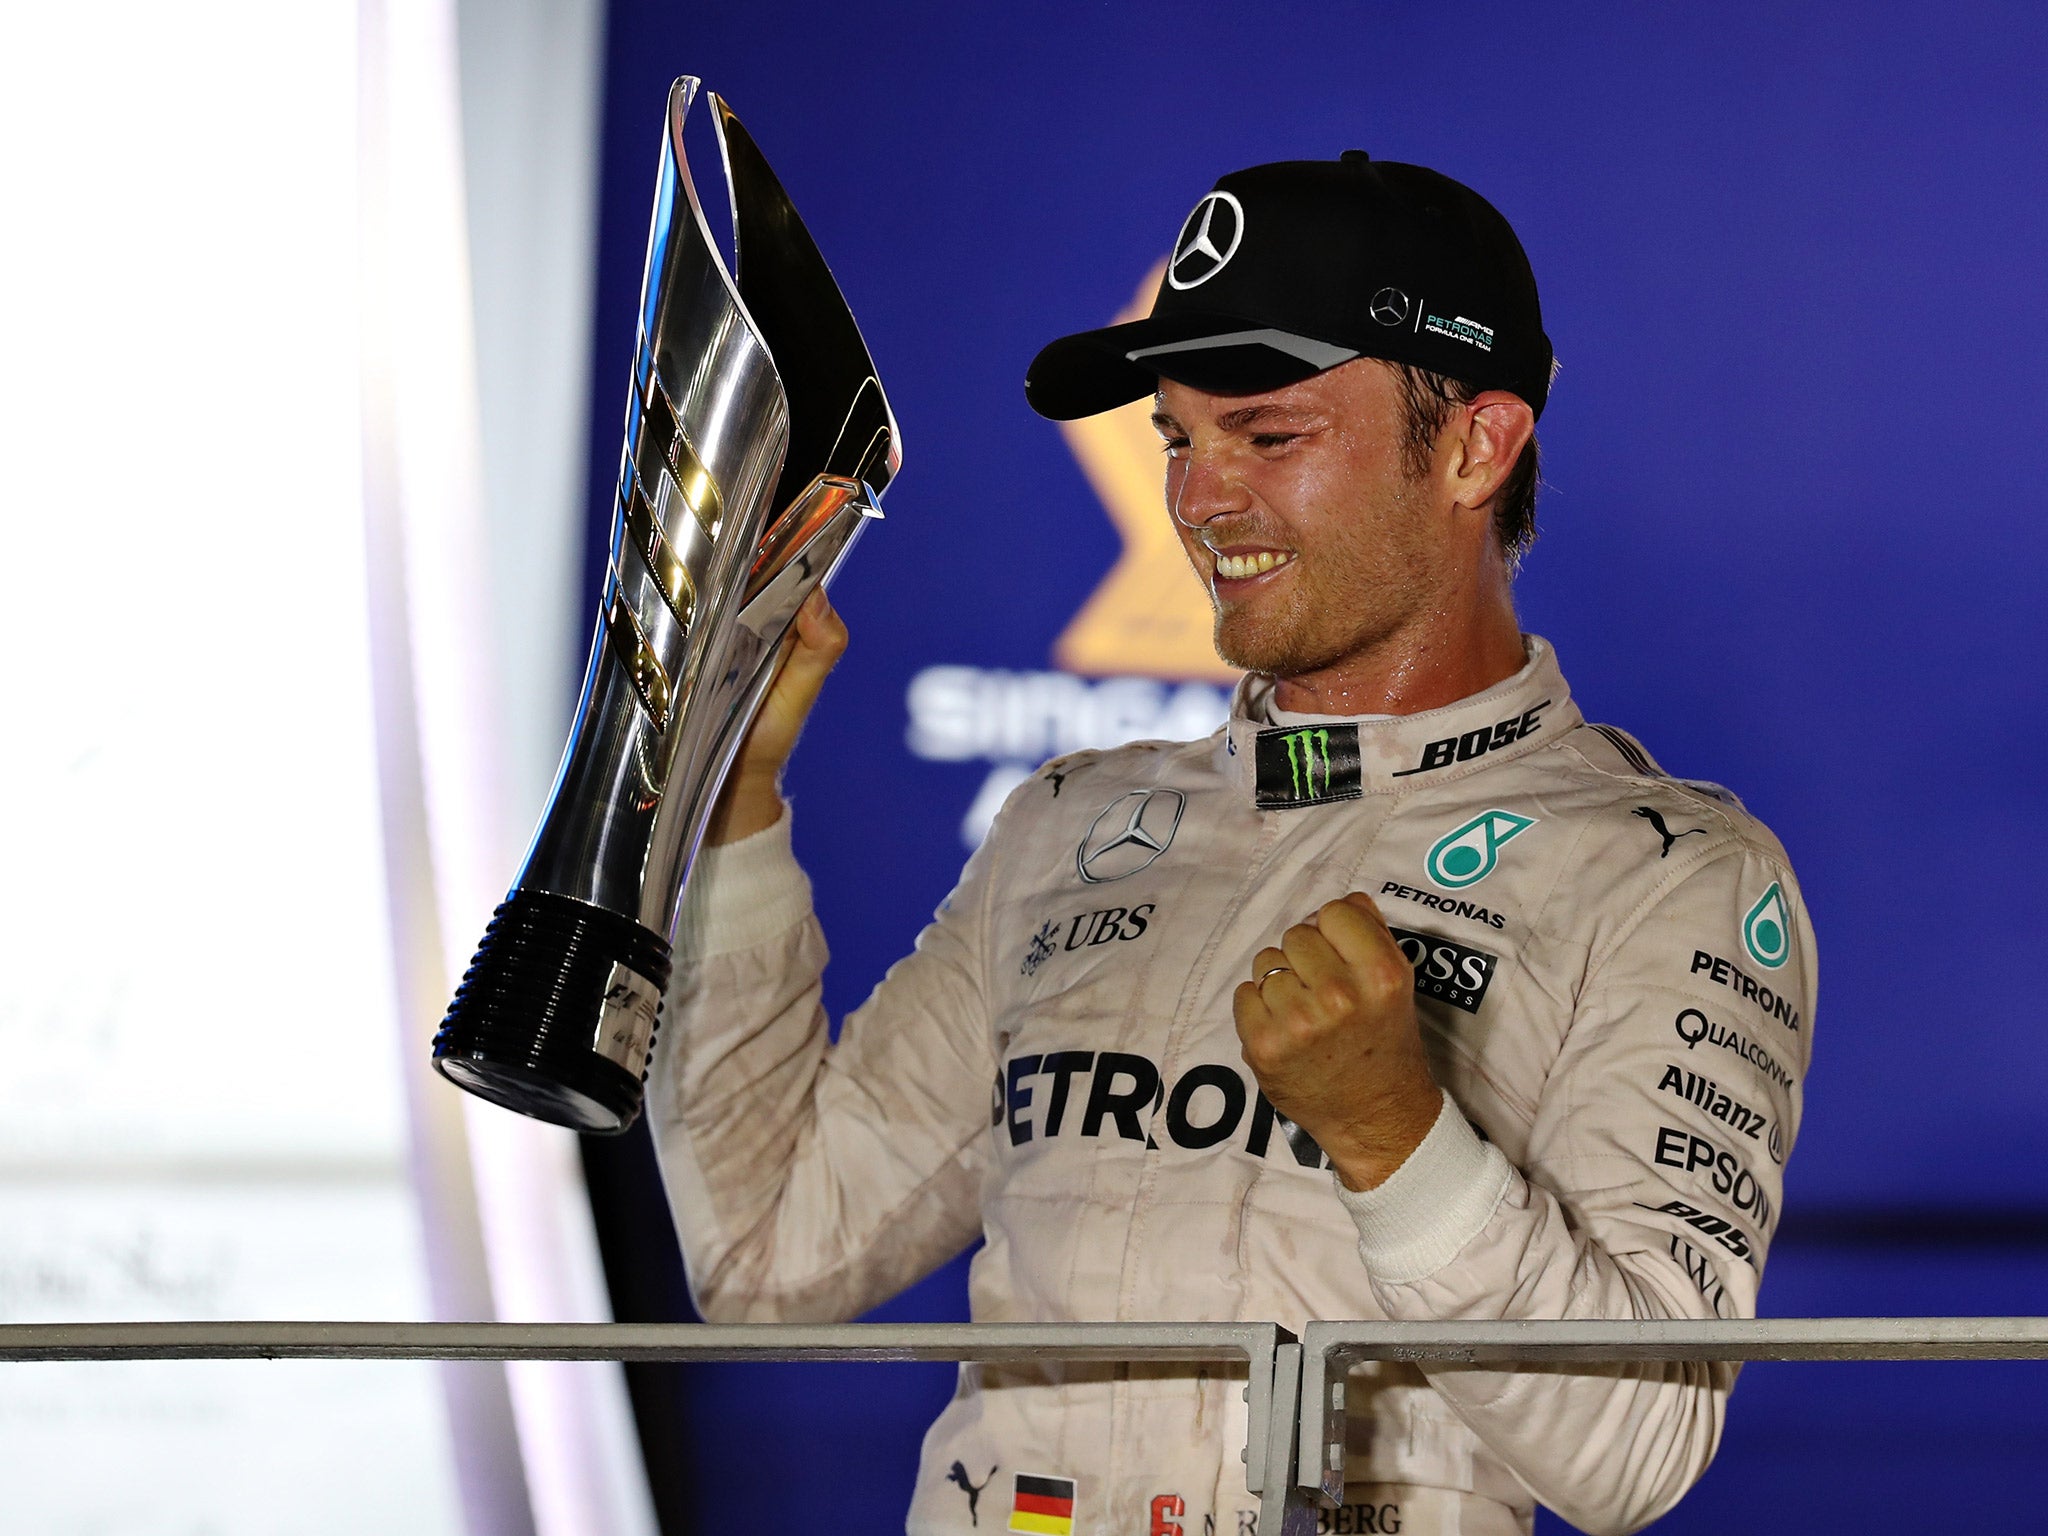 Nico Rosberg won the Singapore Grand Prix to take the lead in the drivers' championship